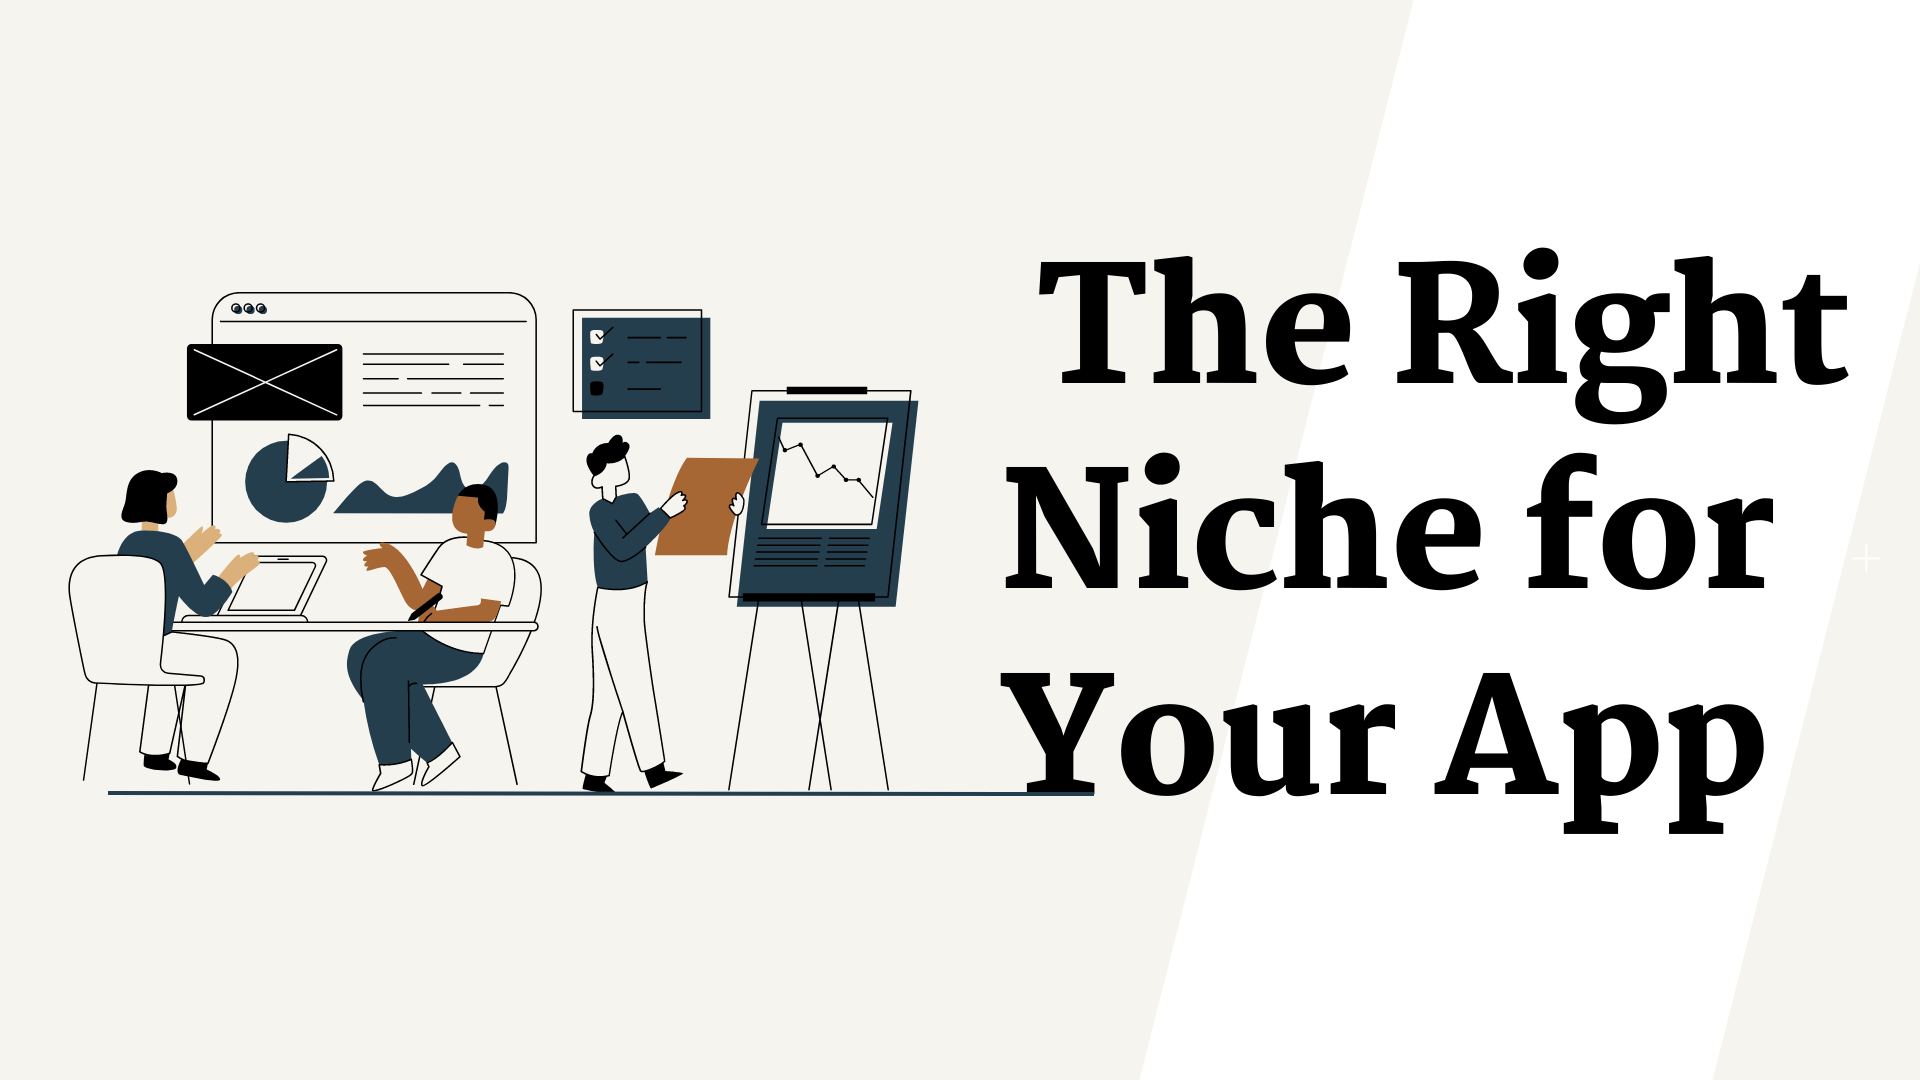 Identifying the Right Niche for Your App